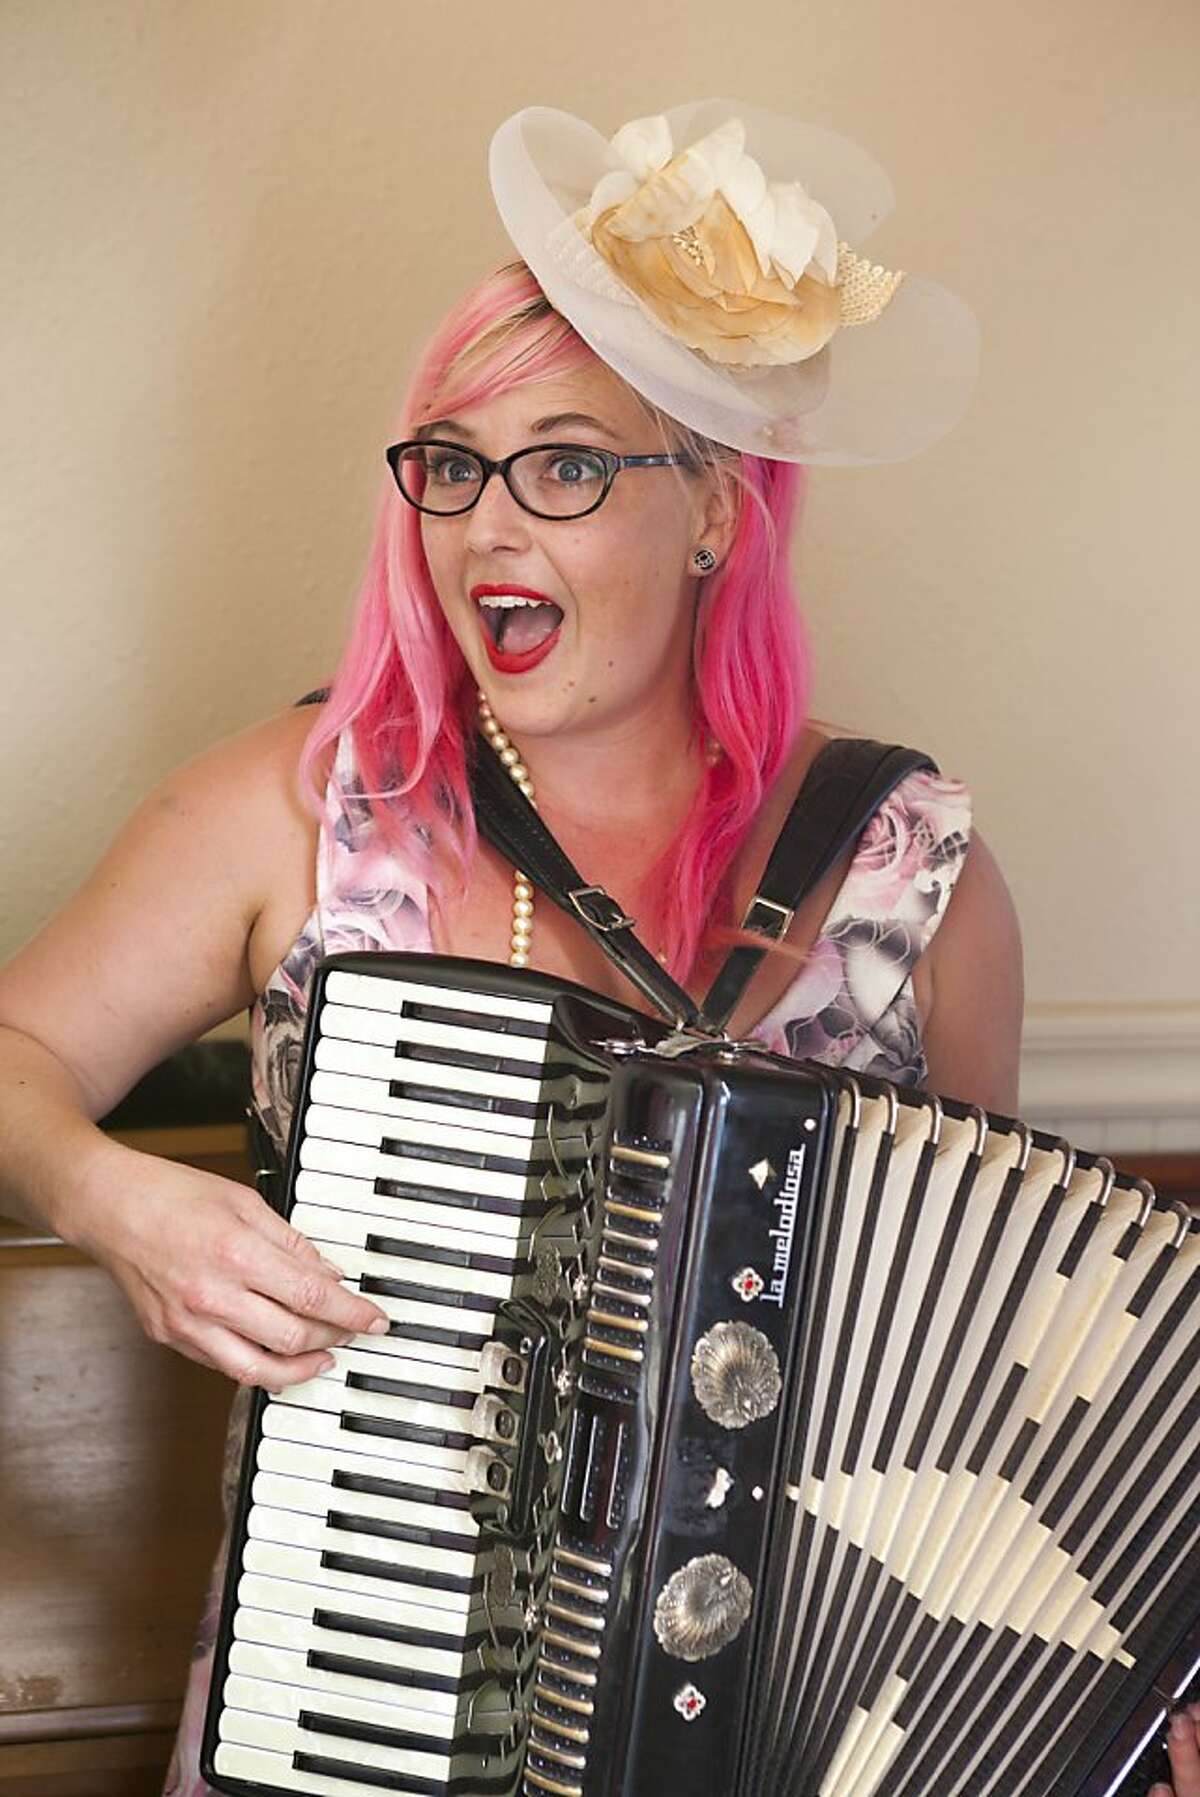 Rachael Devlin and her trusty accordian are a fixture at the Jerk Church. Photographed in Oakland, CA on Sunday, April 21, 2013.